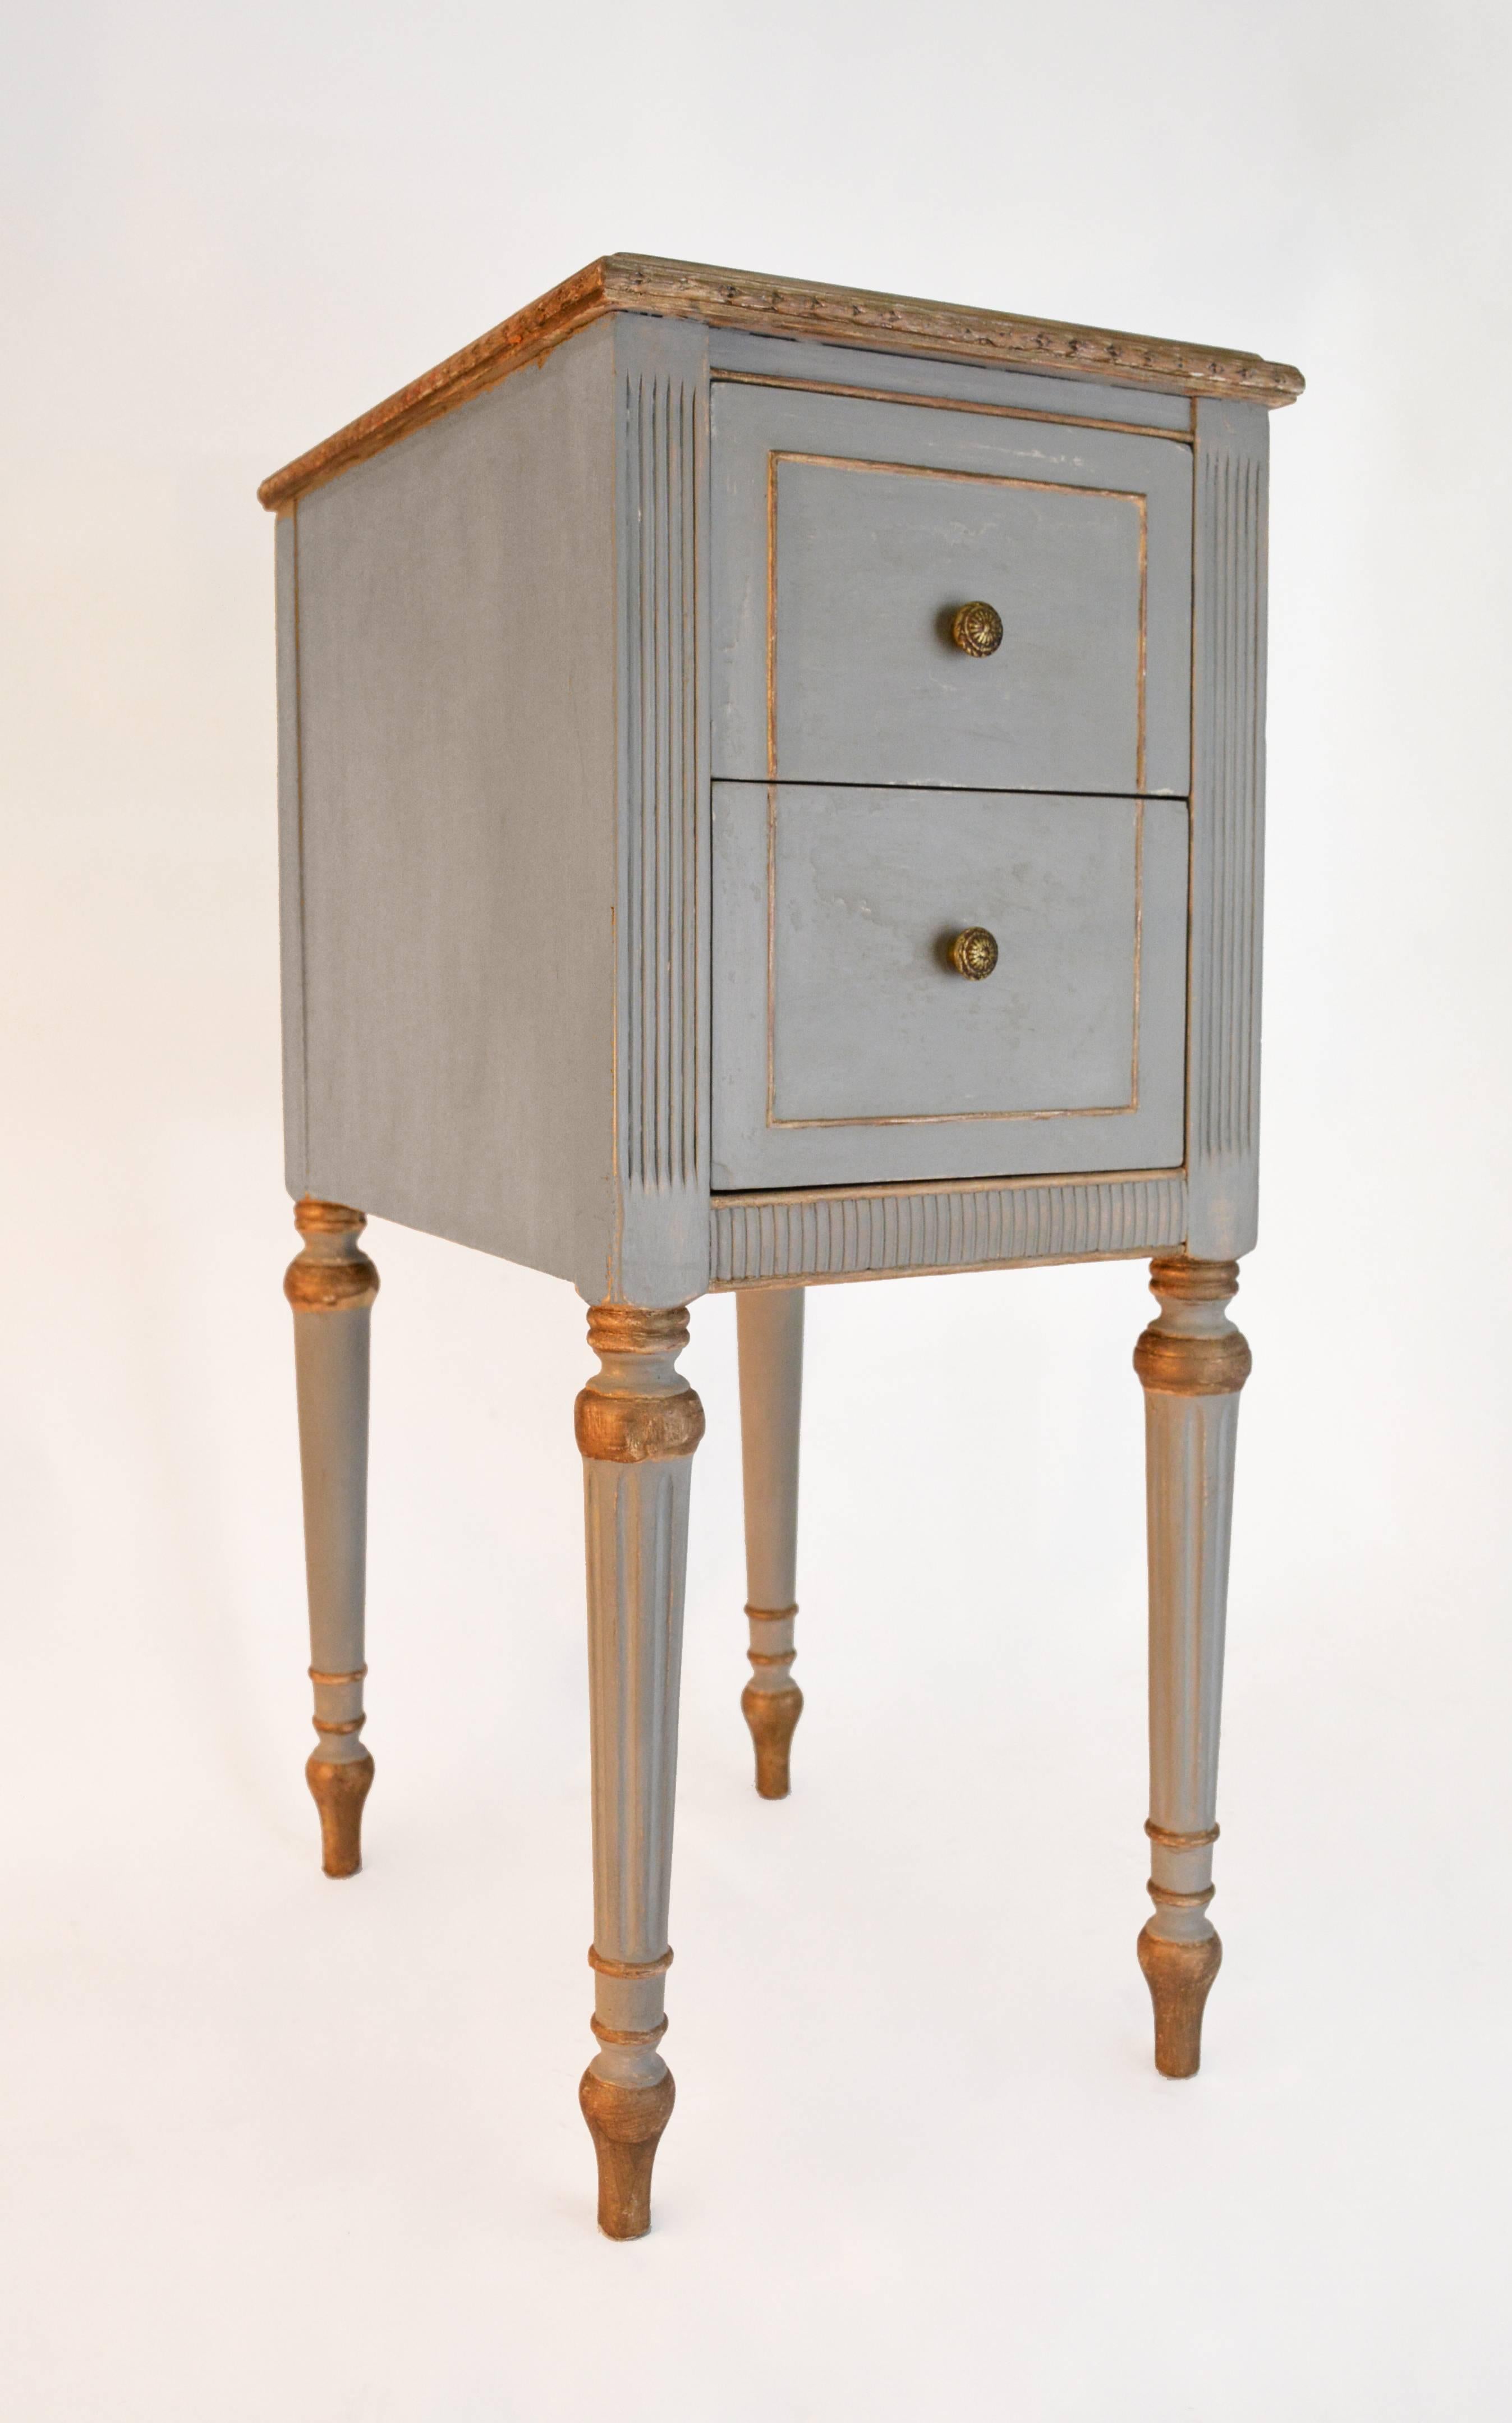 Gustavian Neoclassical style painted night stand with fluted panels surrounding three sides, pair of dovetailed drawers with brass pulls, as well as fluted legs.  Painted a light gray and trimmed in gilt.  Can also work with Louis XVI style decor.